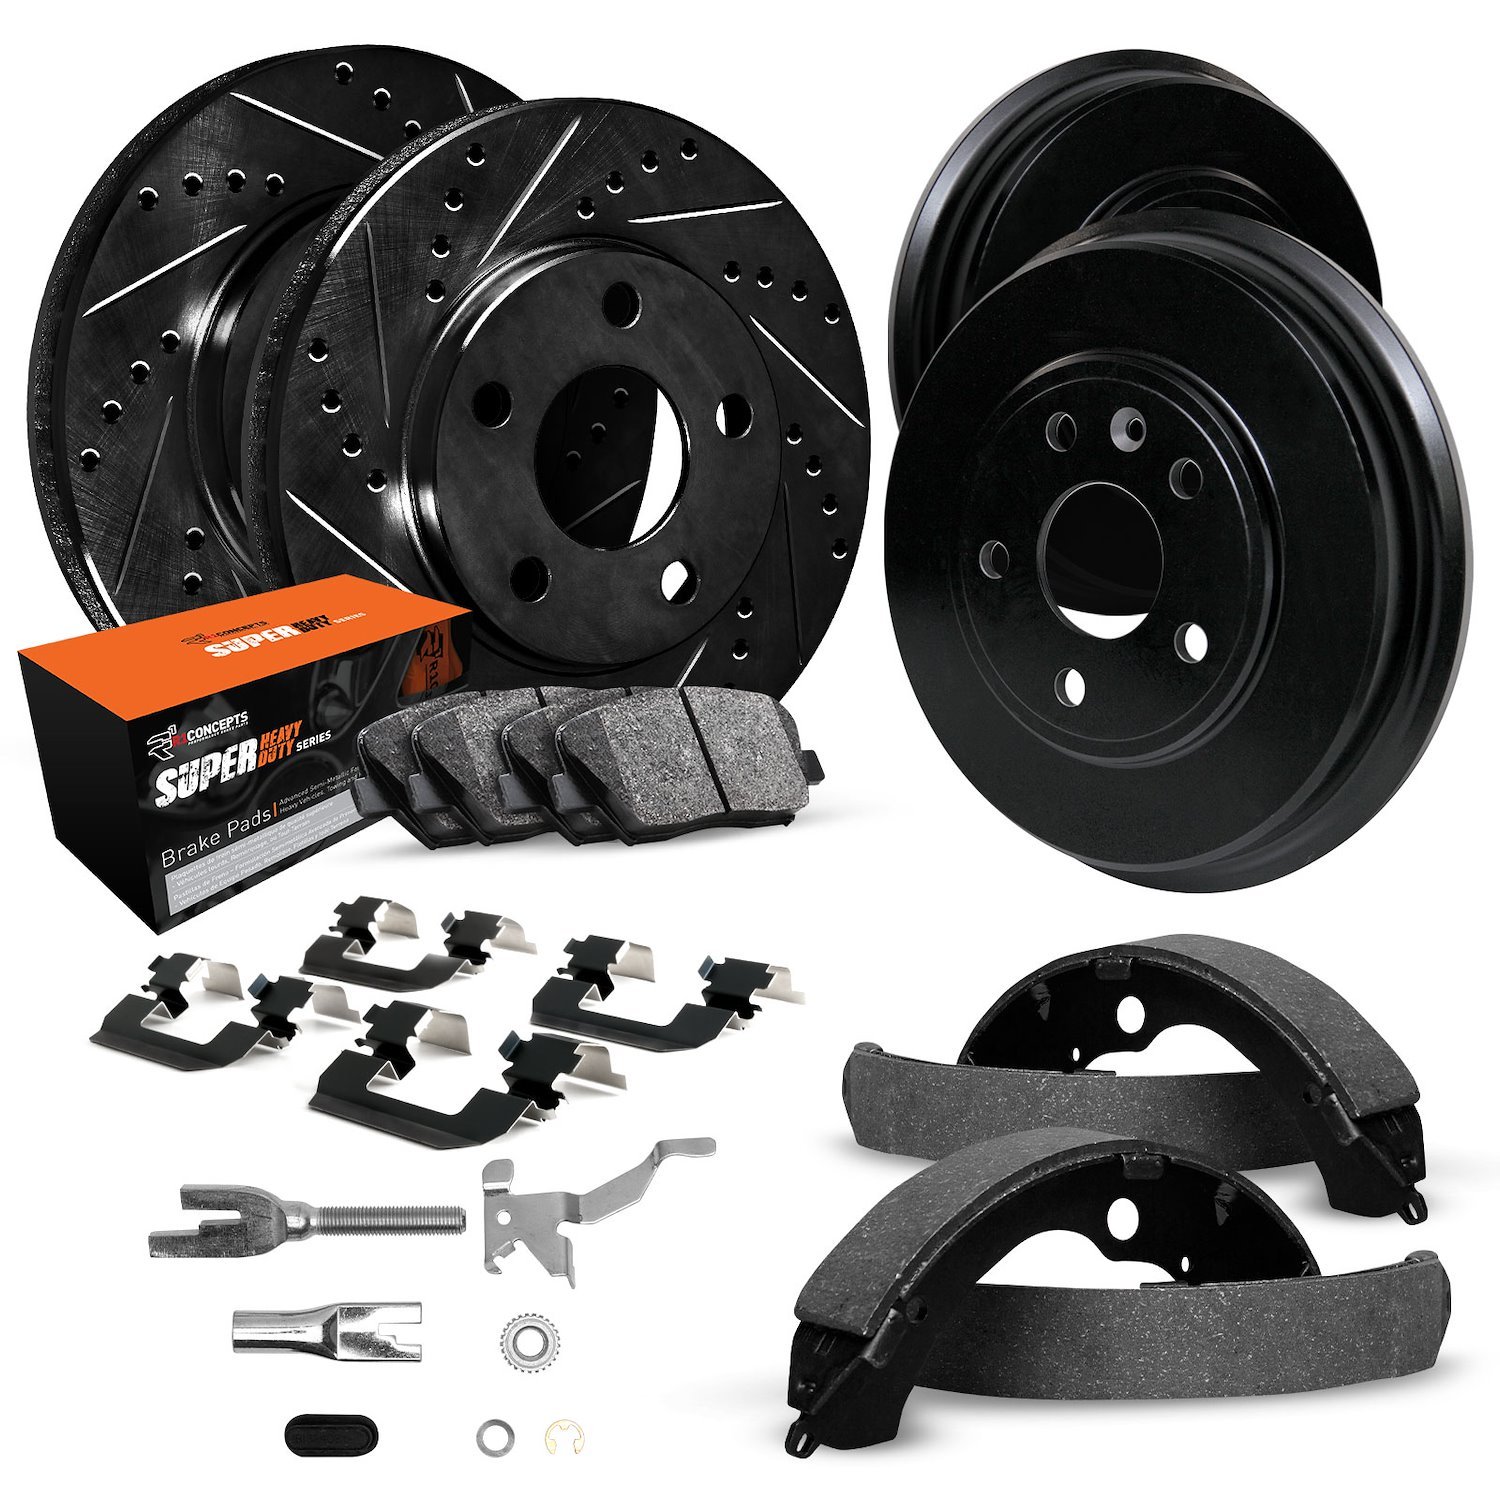 E-Line Drilled/Slotted Black Rotor & Drum Set w/Super-Duty Pads, Shoes, Hardware/Adjusters, 1986-1991 Ford/Lincoln/Mercury/Mazda